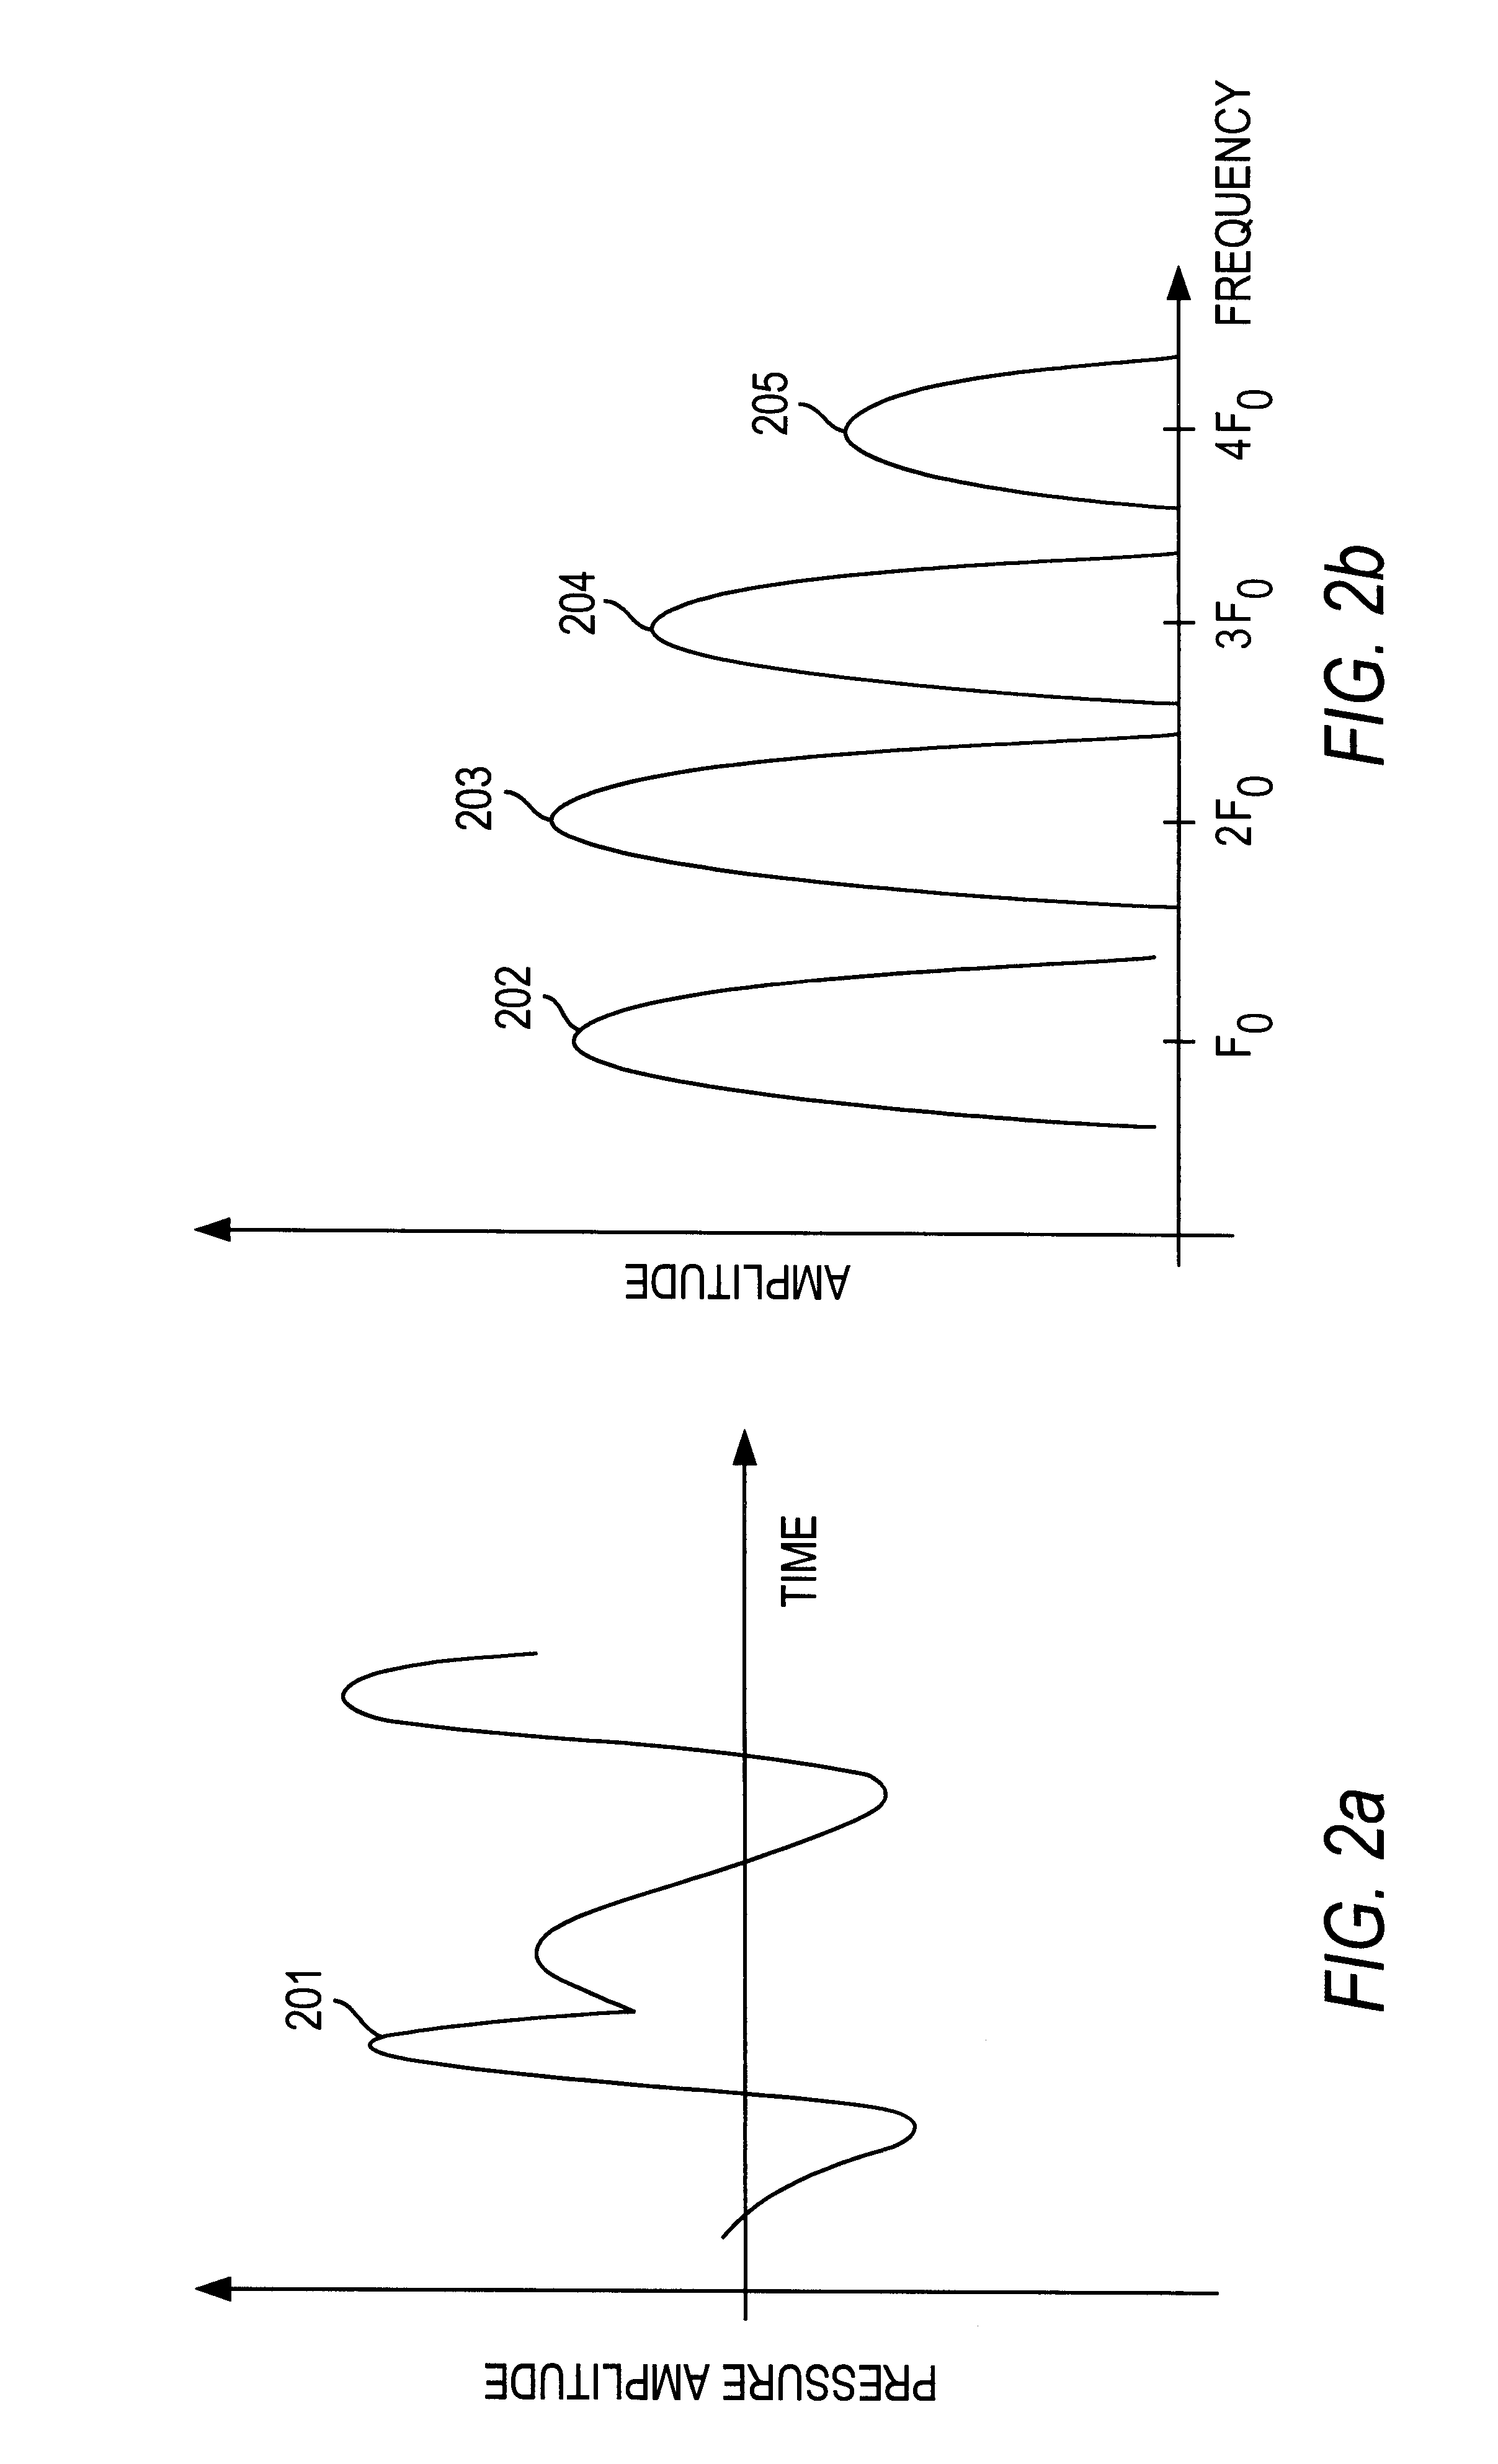 Method of detecting ultrasound contrast agent in soft tissue, and quantitating blood perfusion through regions of tissue